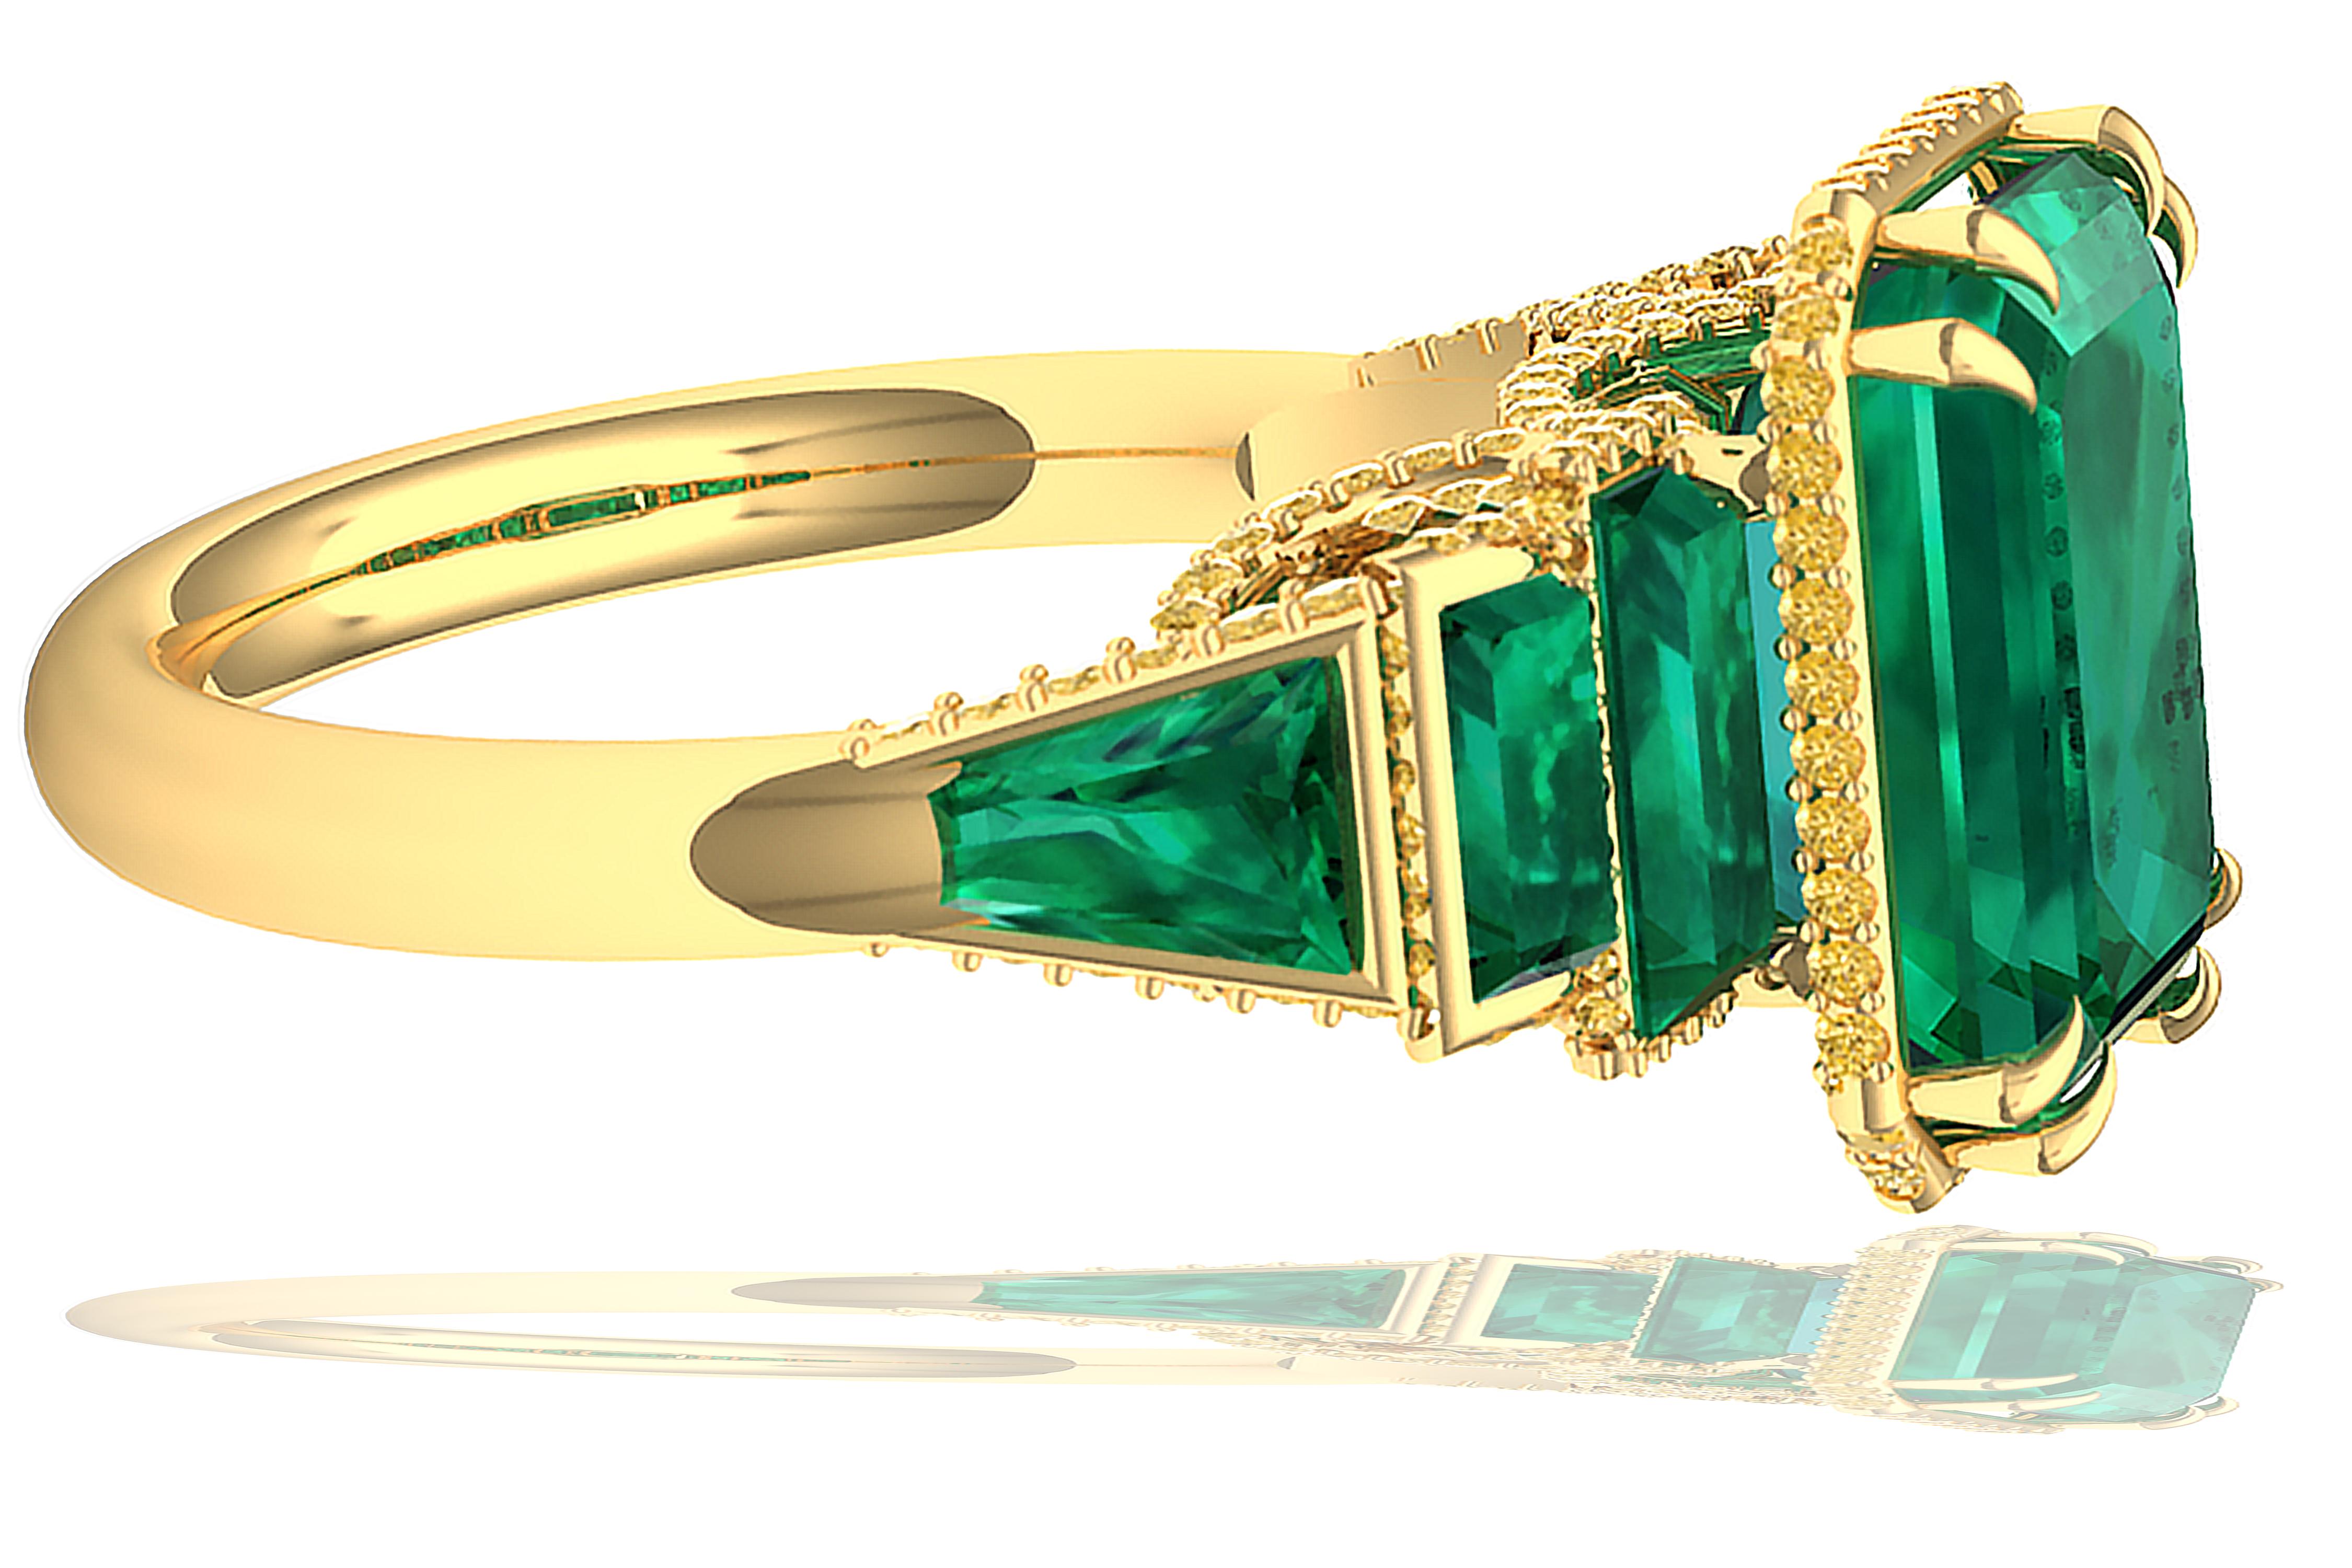 A combination of highly sought after emerald and rich yellow diamond makes this ring one to cherish.  The center stone of this ring is appx 4 carats and is GIA certified with F1 indicating light oiling, often used in emeralds polishing.  The center